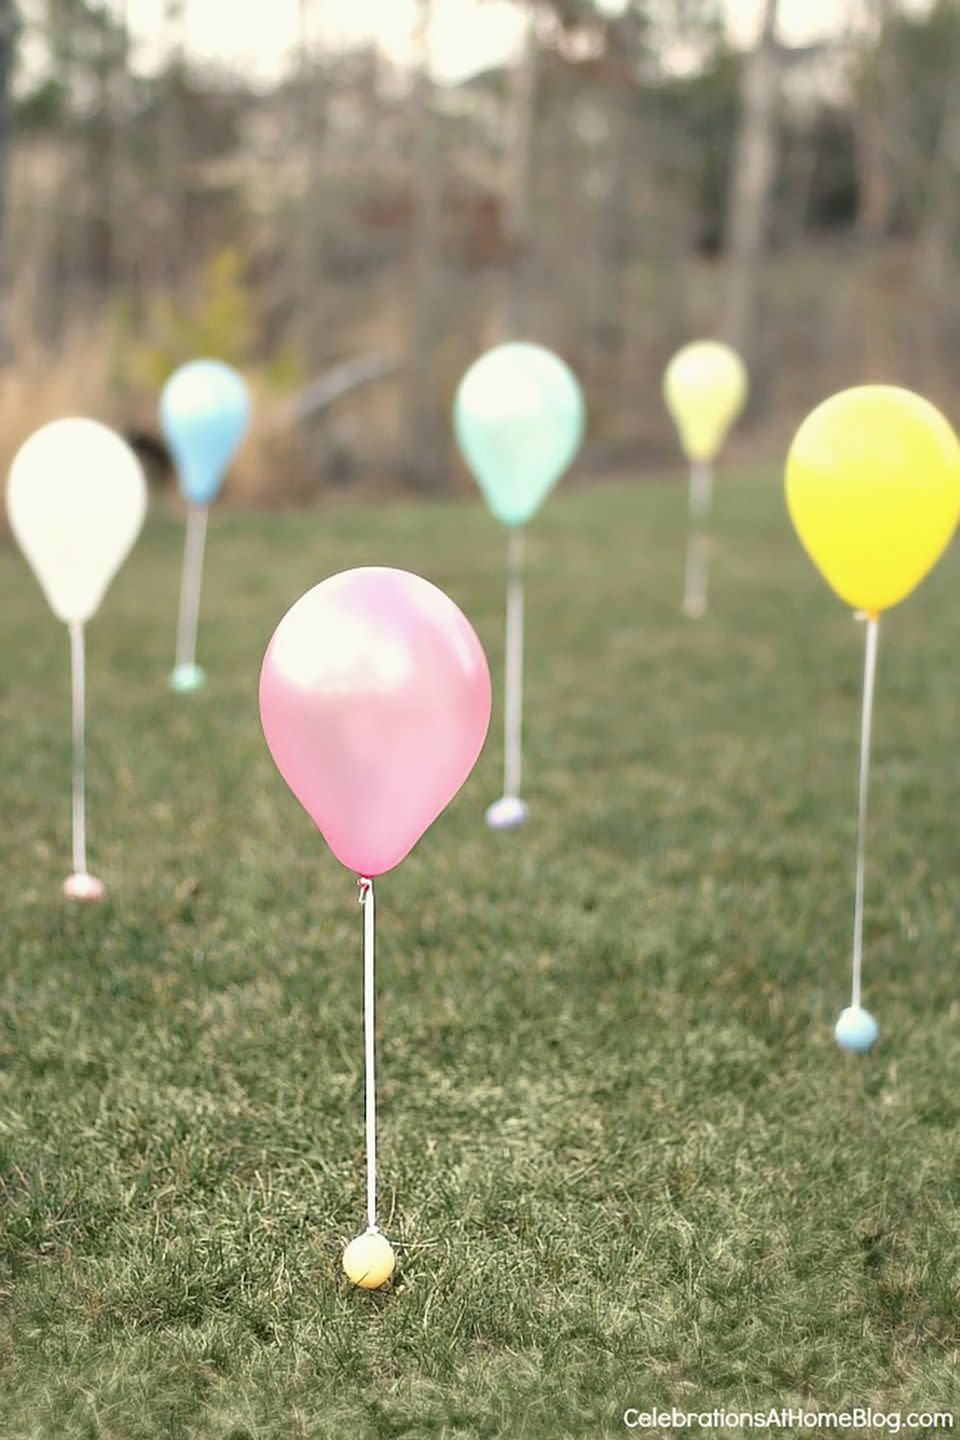 27) Tie Balloons to the Eggs for Toddlers